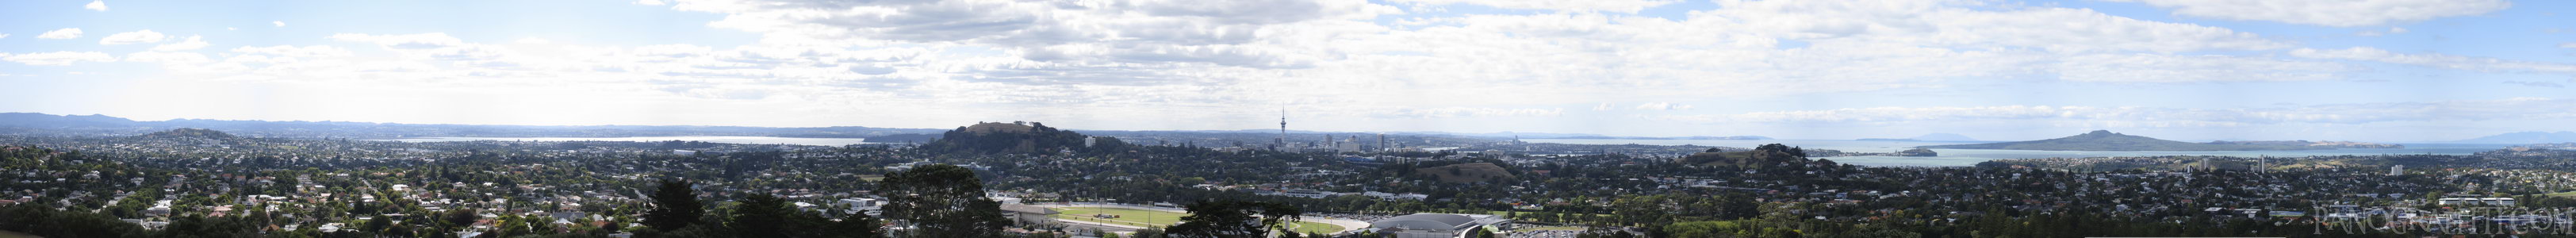 Sky Tower from One Tree Hill - The iconic Sky Tower in the center of the Auckland skyline as seen from the peak of One Tree Hill